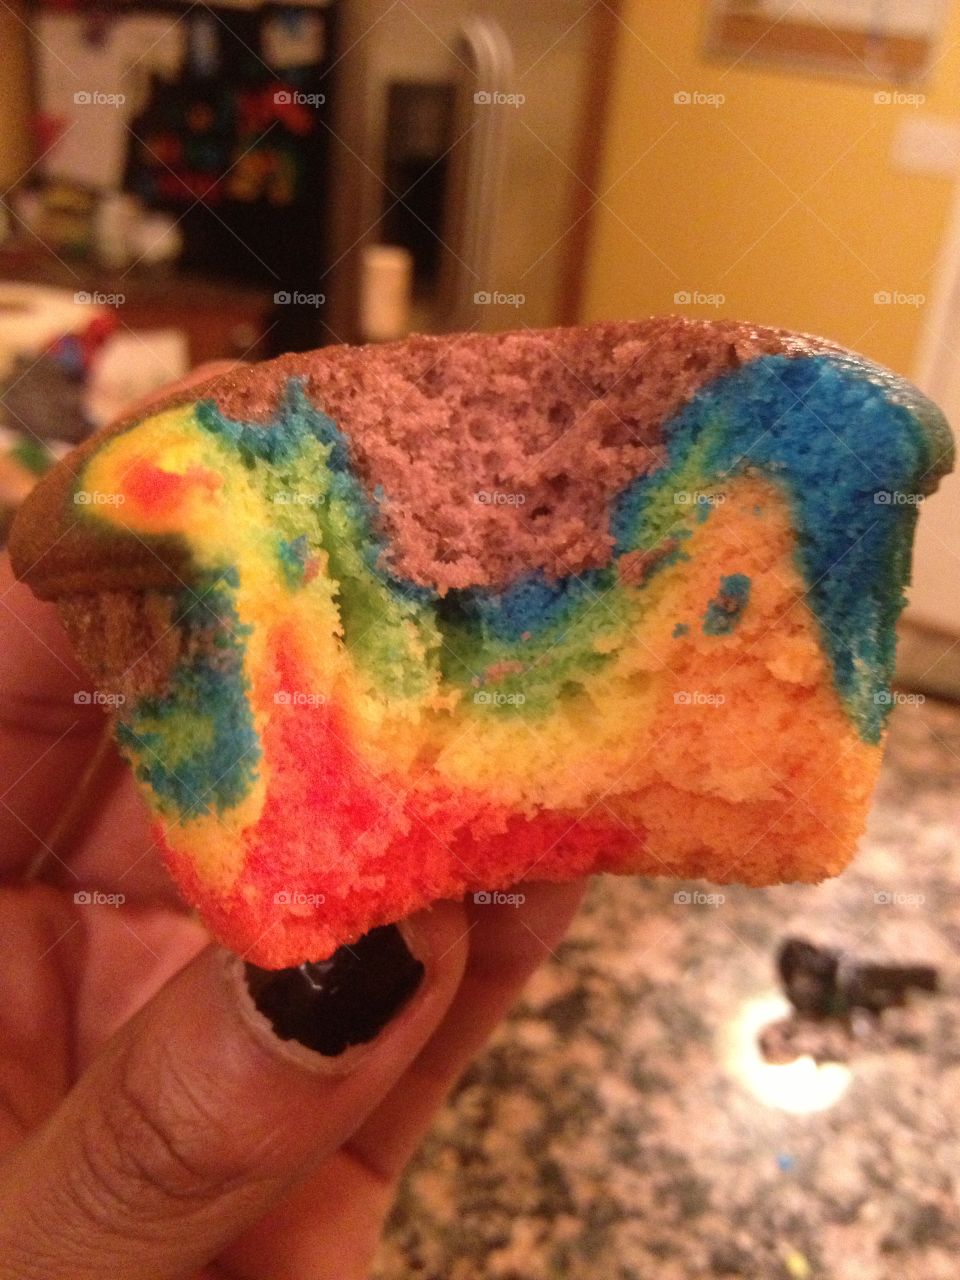 Made these yummy rainbow cakes a while back with my son Zaire.  So yummy.